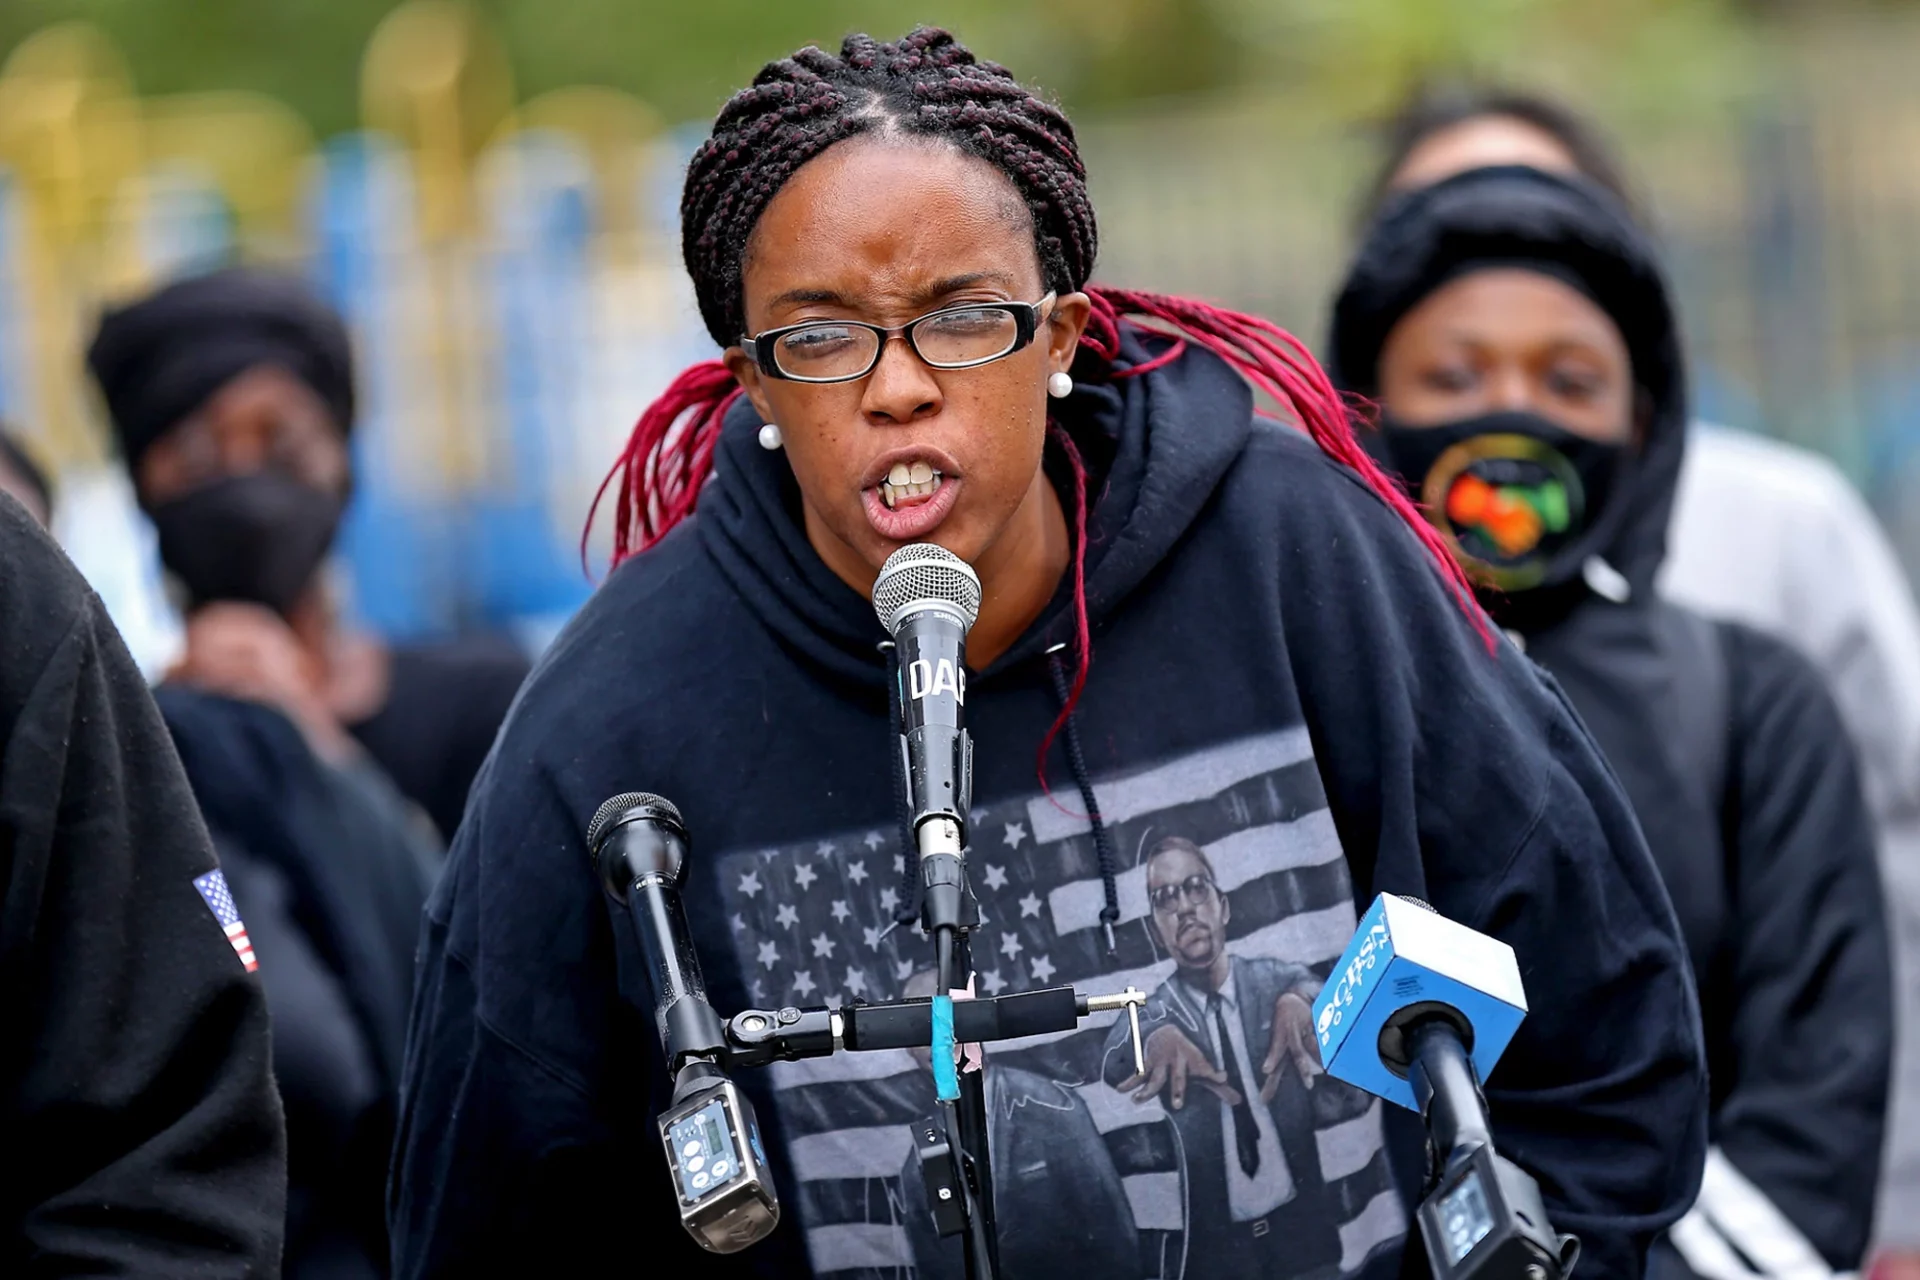 BLM Leader Monica Cannon-Grant Arrested